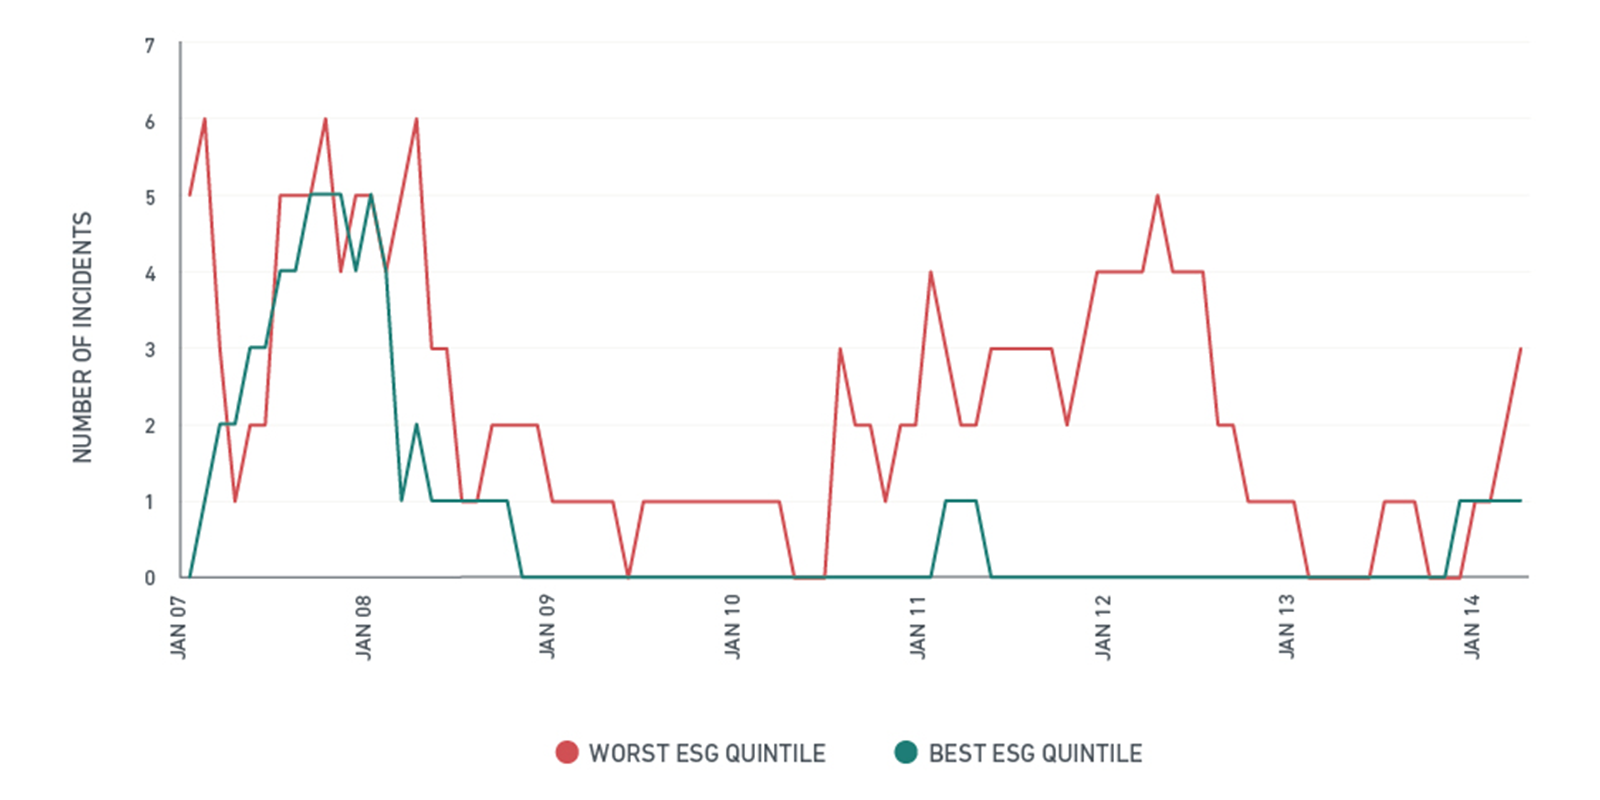 Large drawdown frequency of top vs. bottom ESG quintile